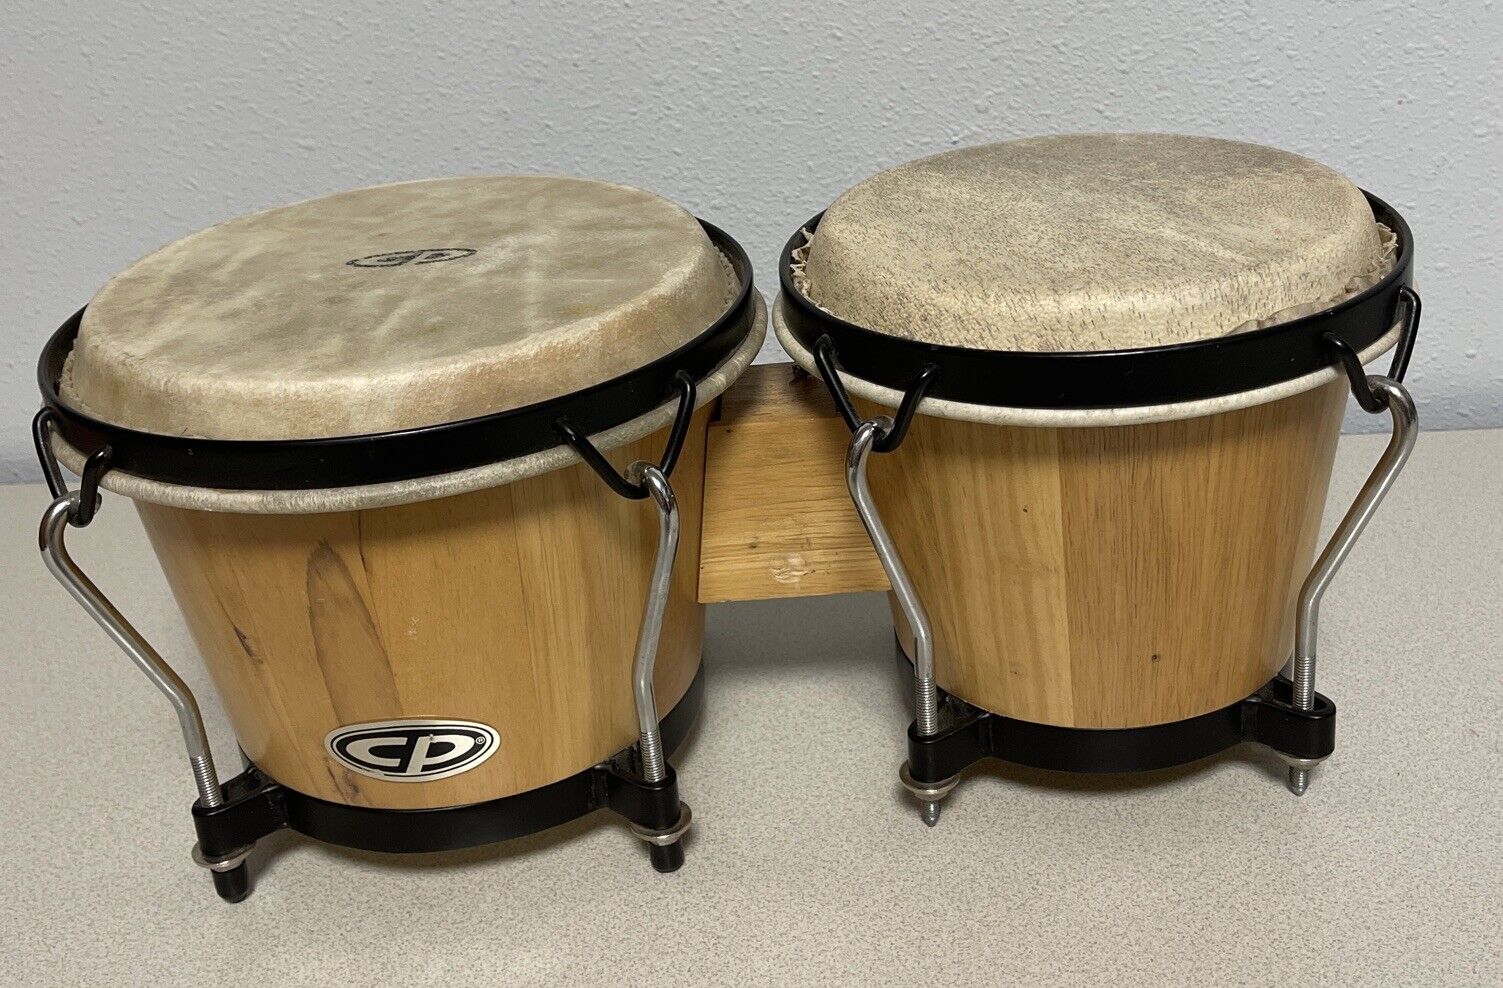 CP Cosmic Percussion Bongos 7” & 6” Drums Natural Wood Great Sound India 1